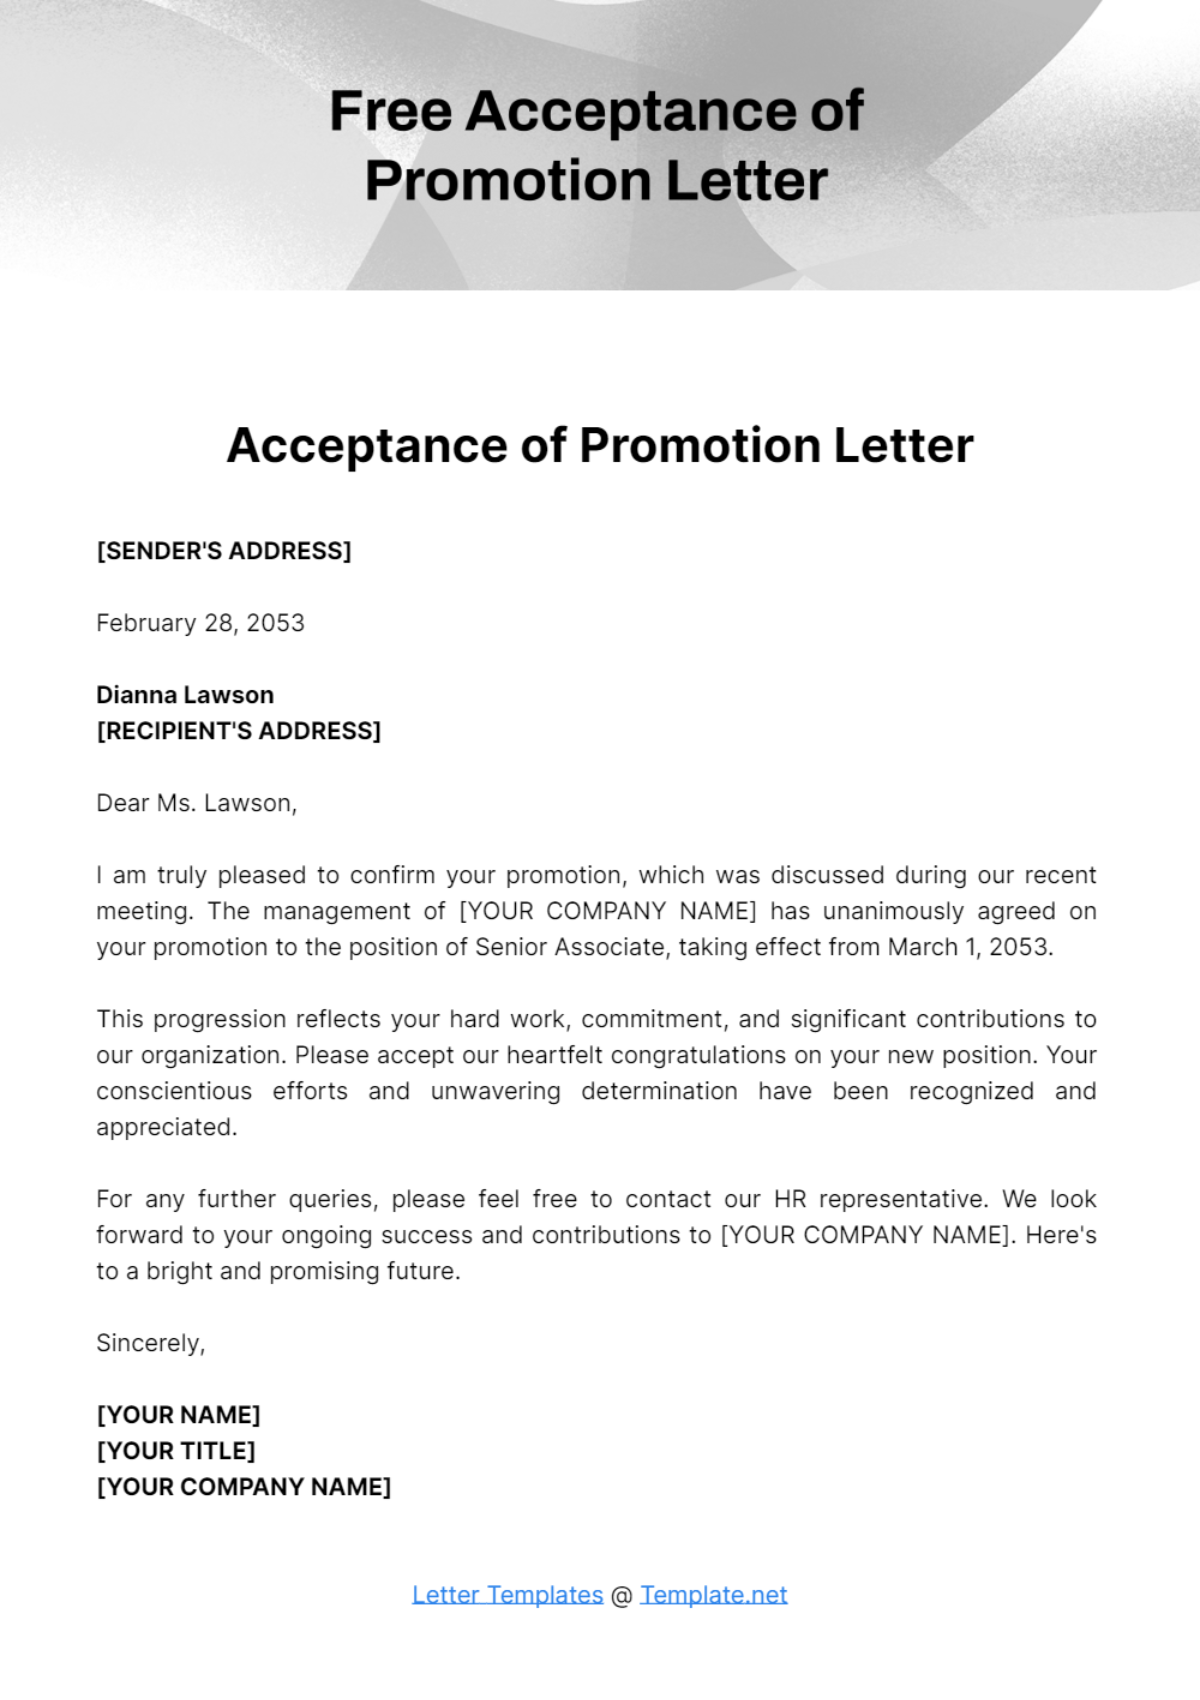 Free Acceptance of Promotion Letter Template